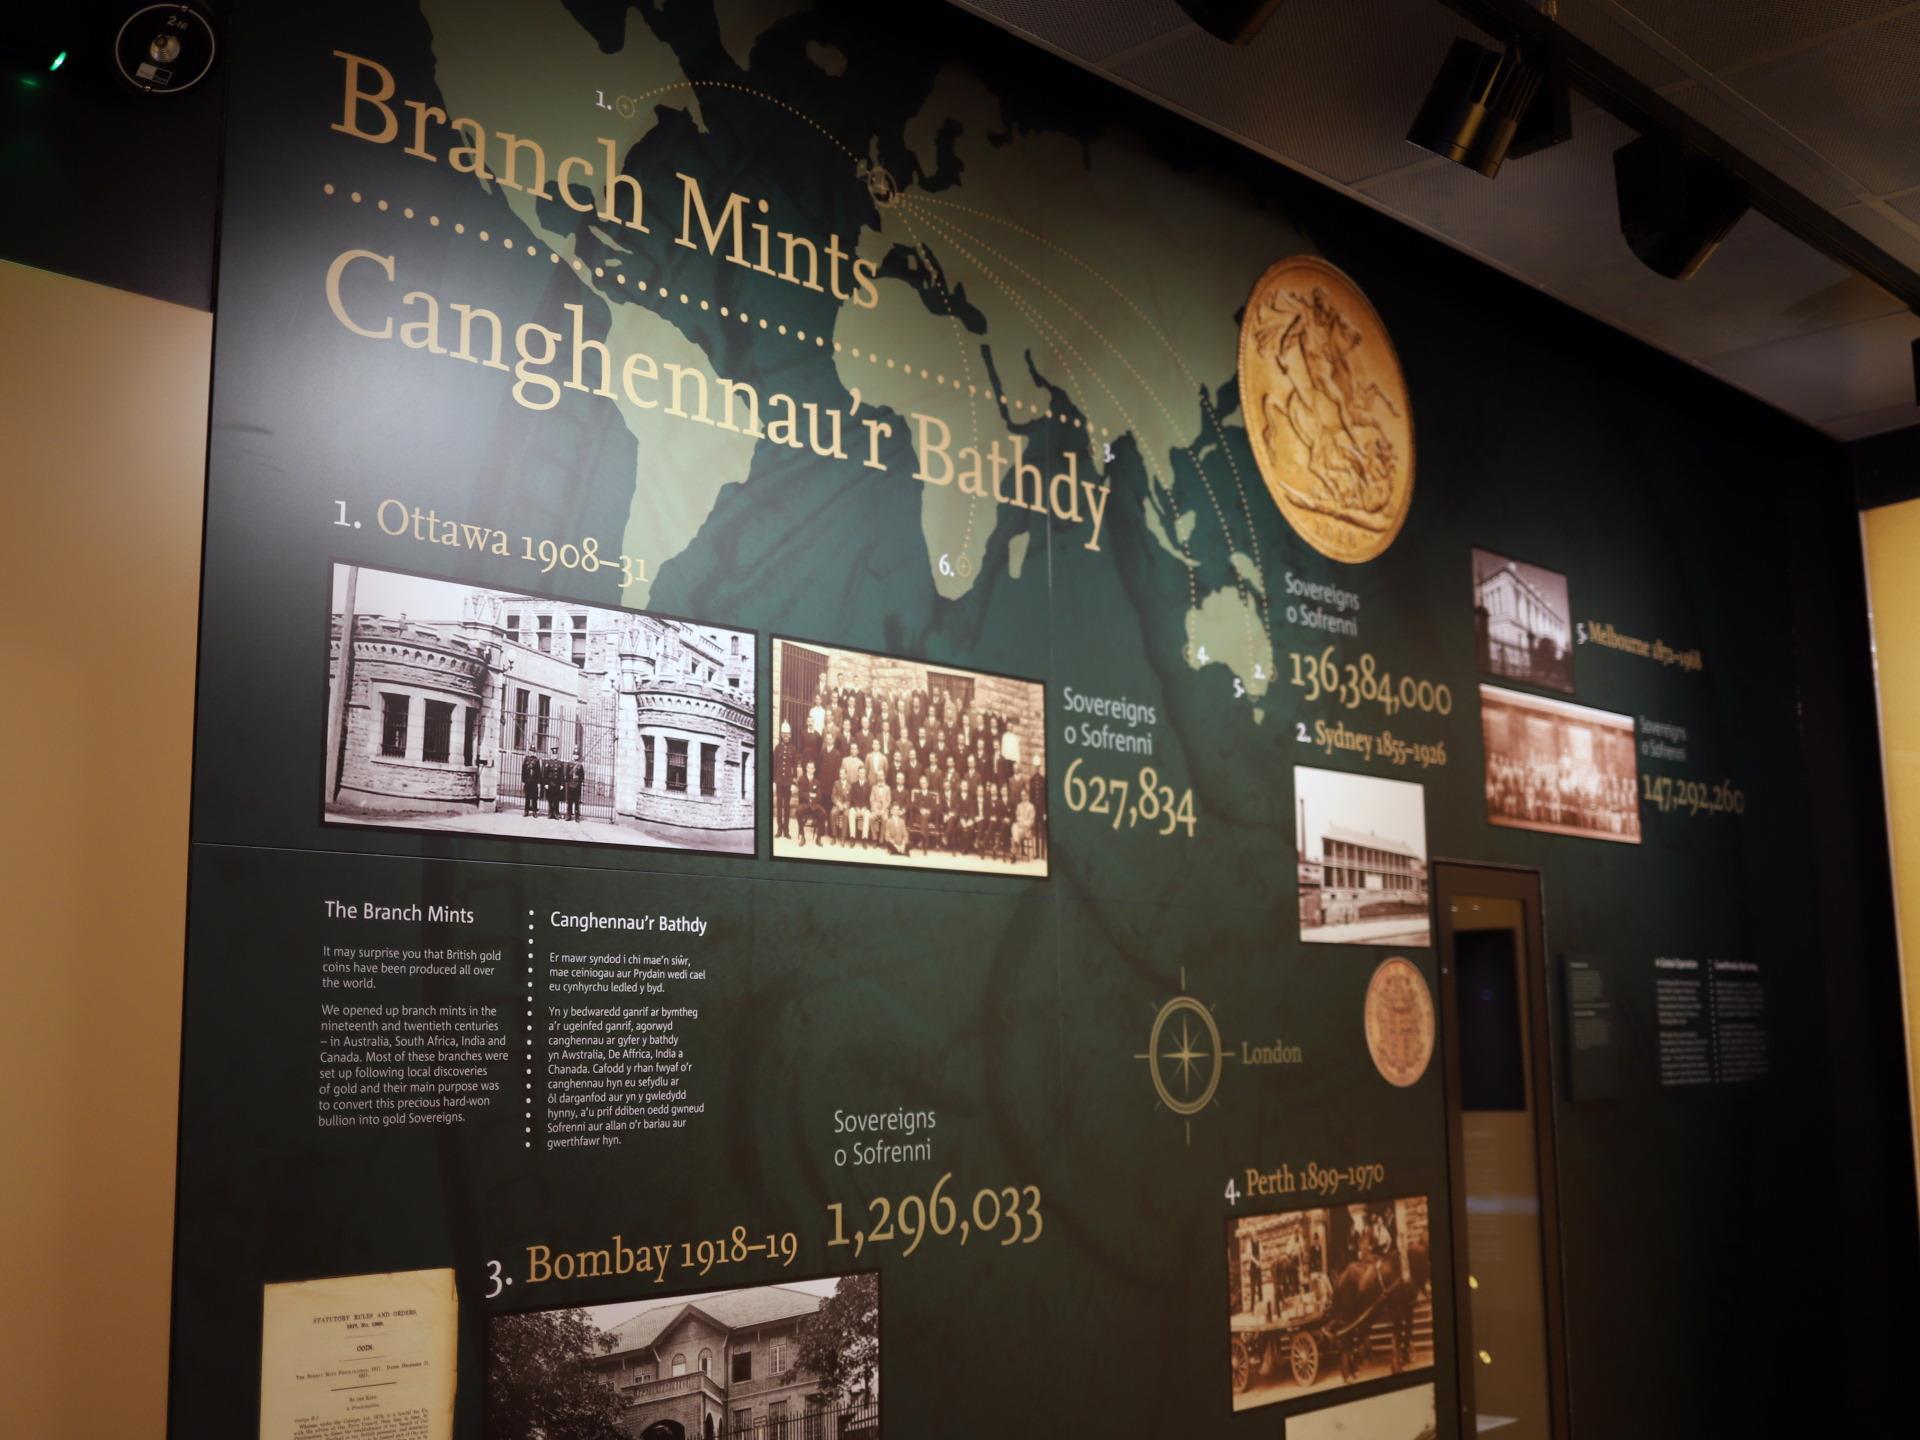 The Royal Mint Exhibition